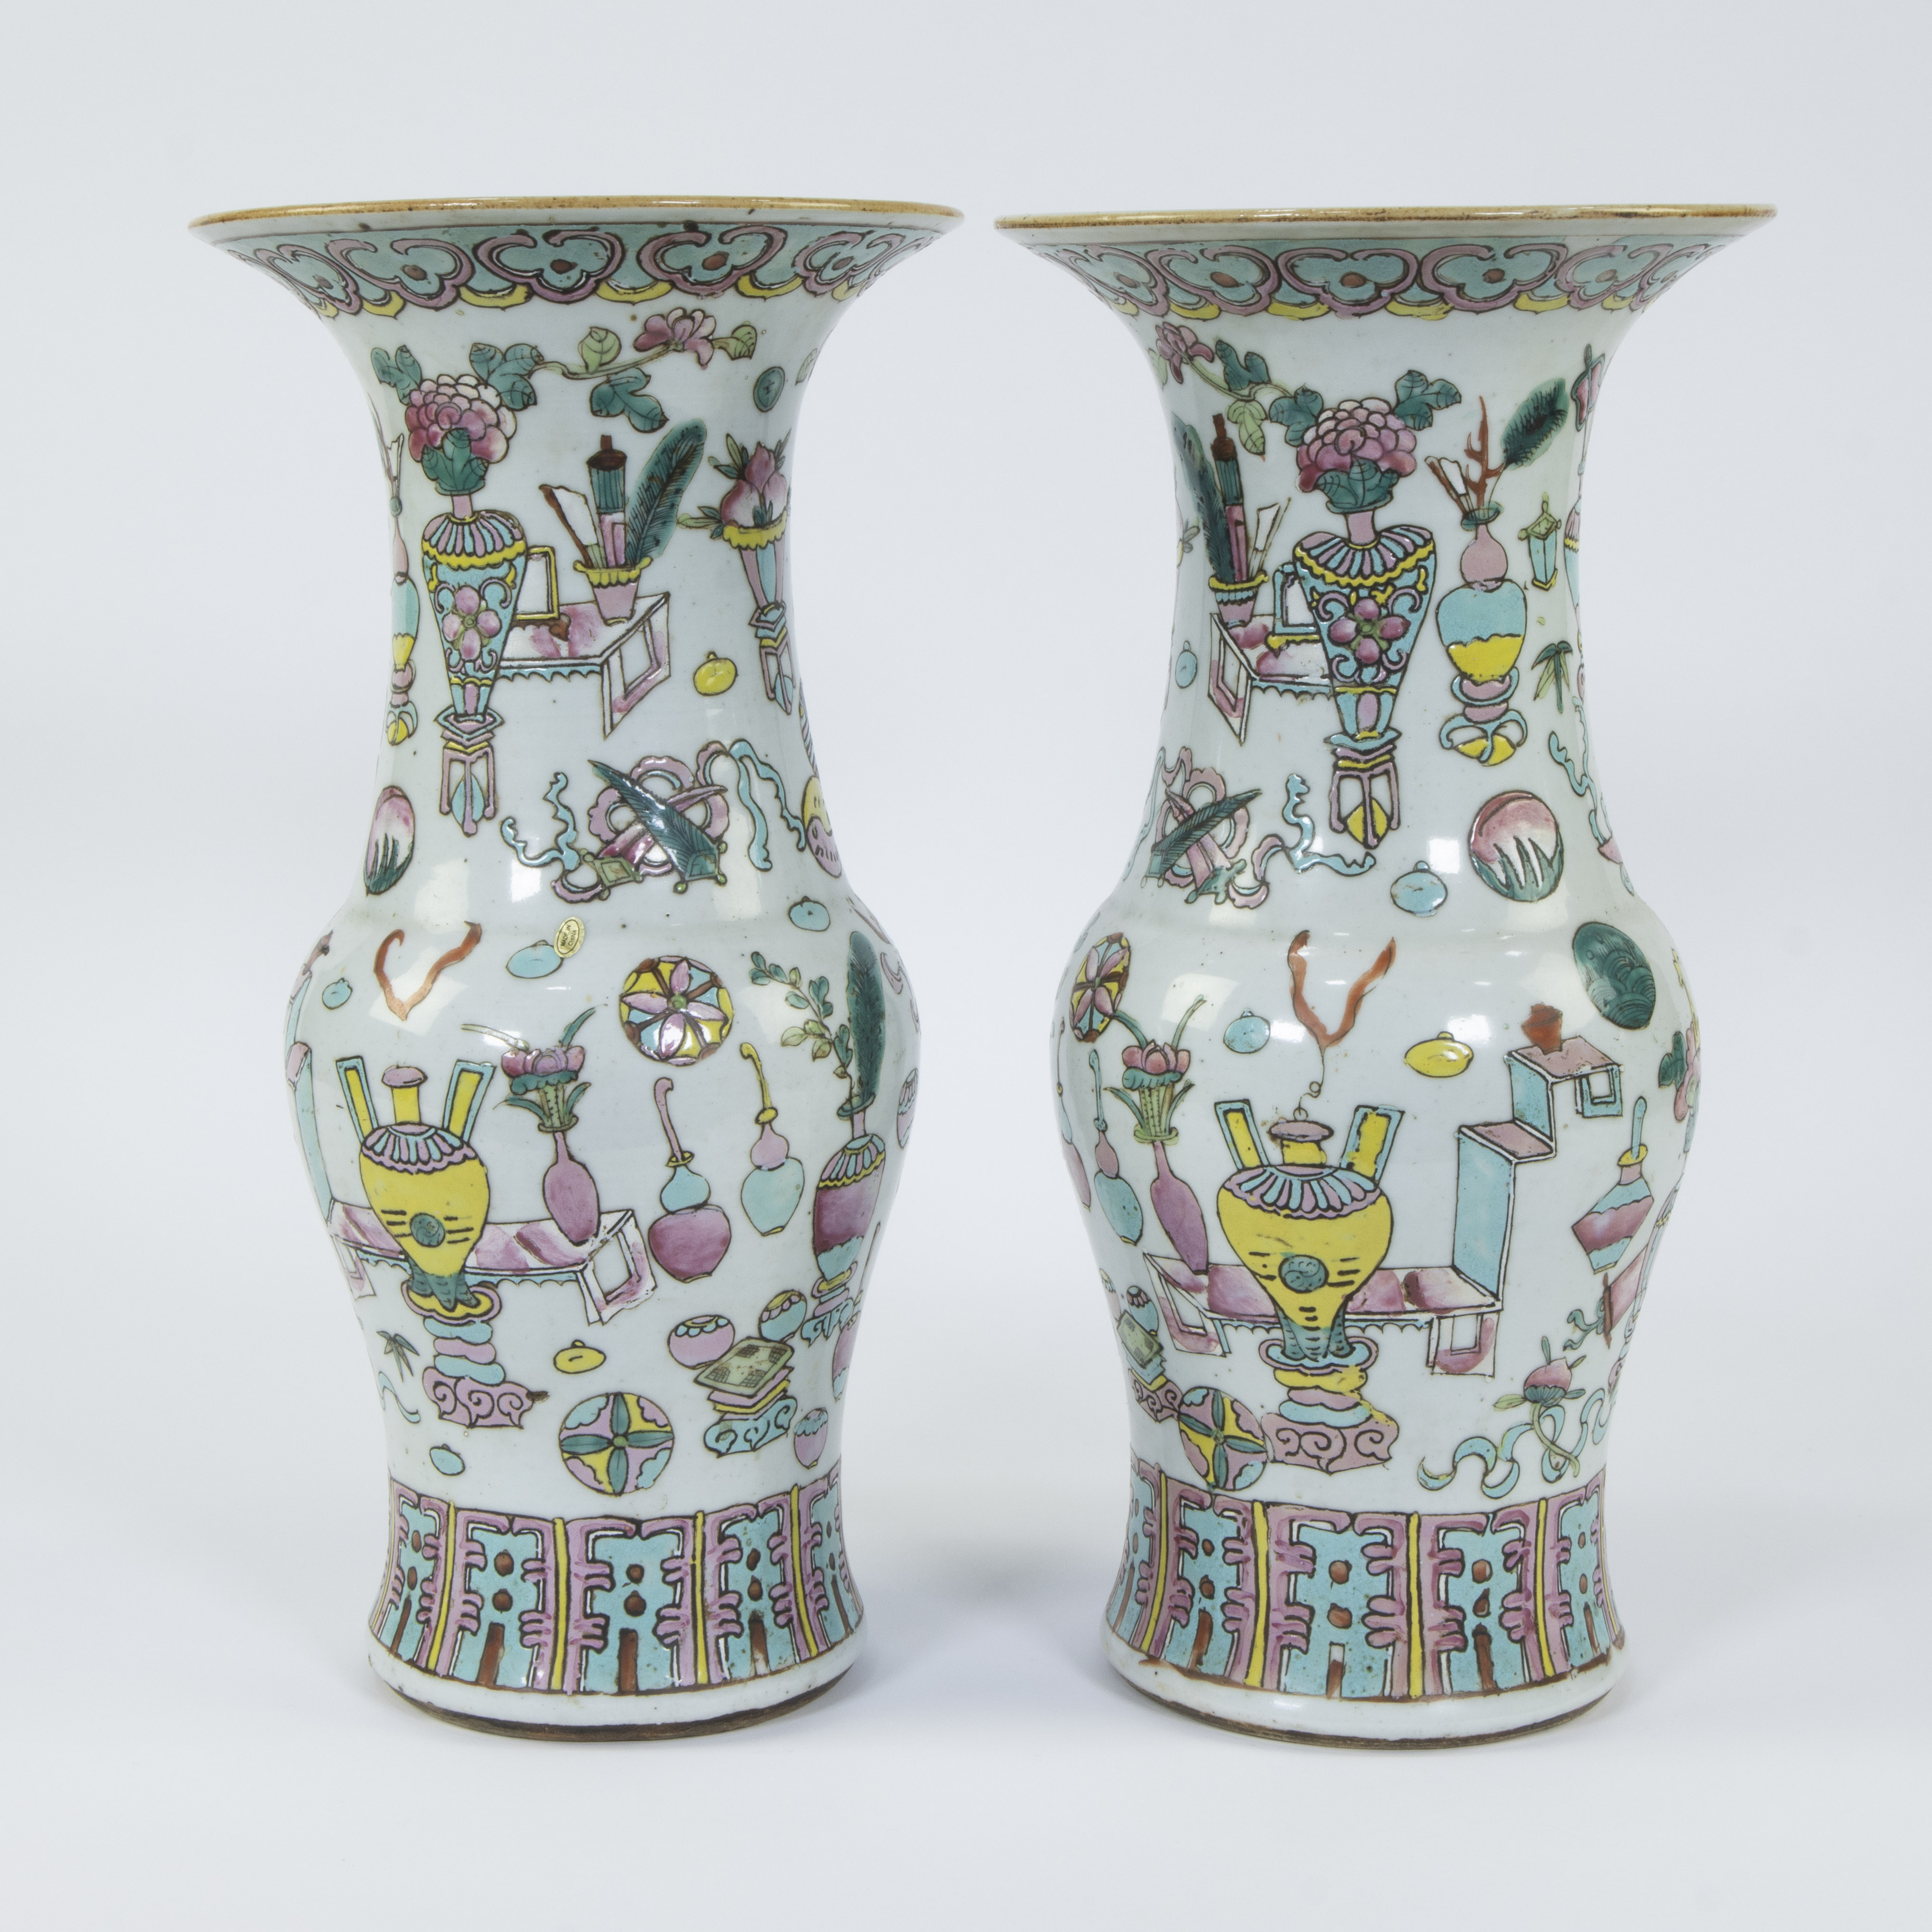 Pair of Chinese famille rose Yenyen vases with decoration of valuables, 19th century - Image 3 of 6